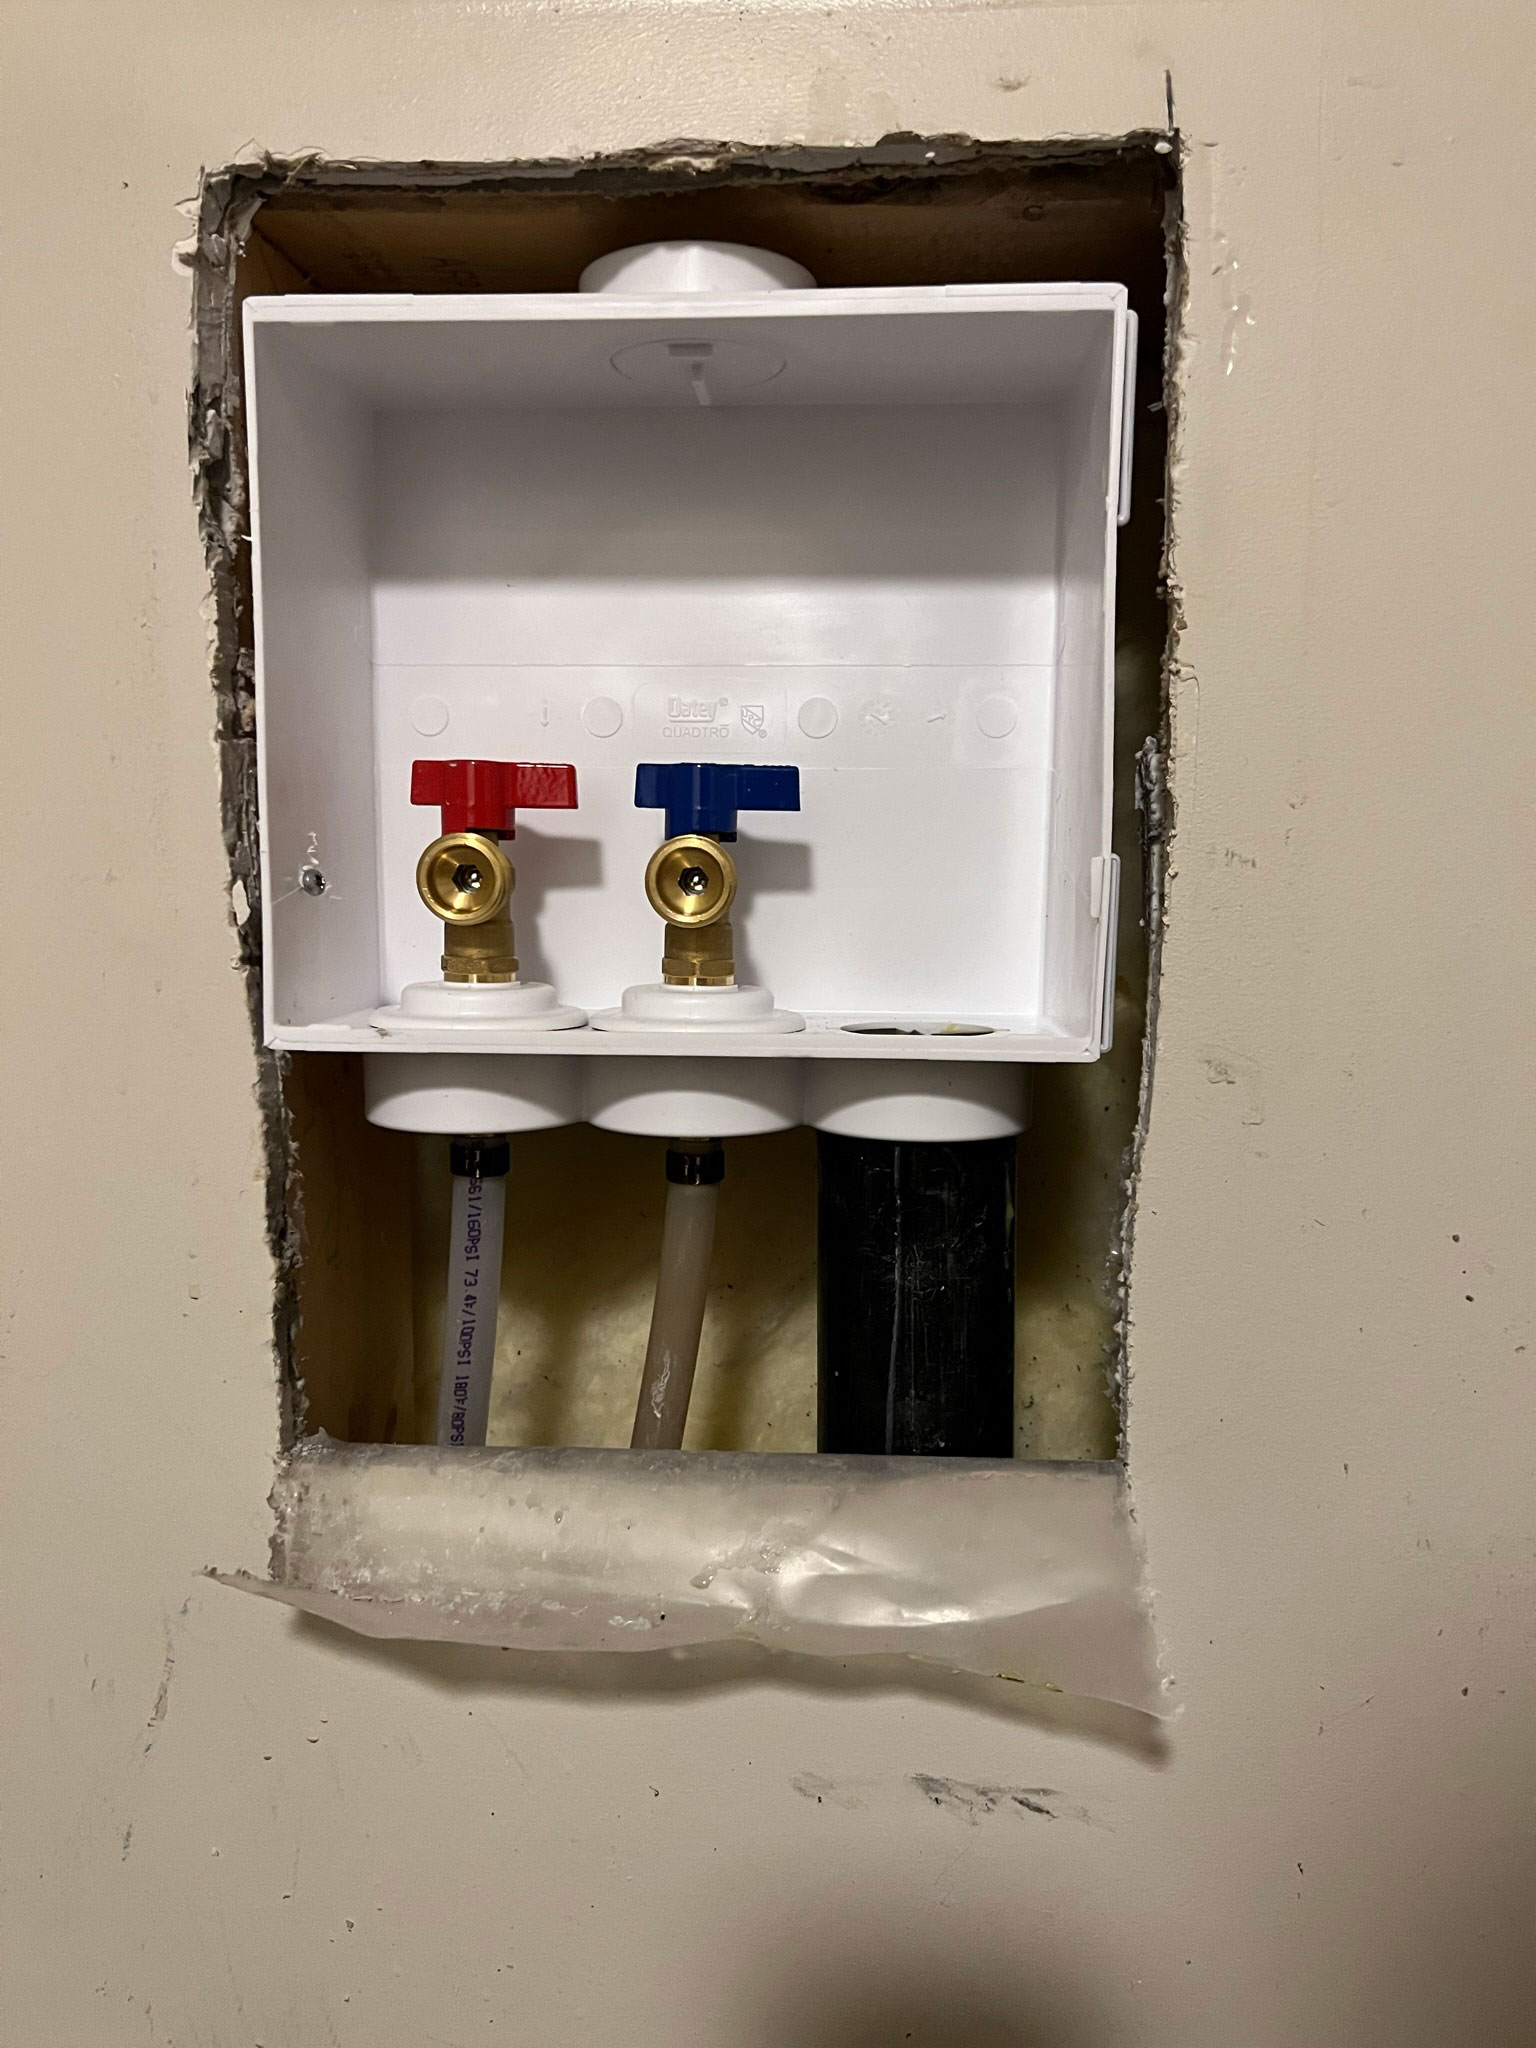 Drywall removed from below a plumbing box, new plubming box installed